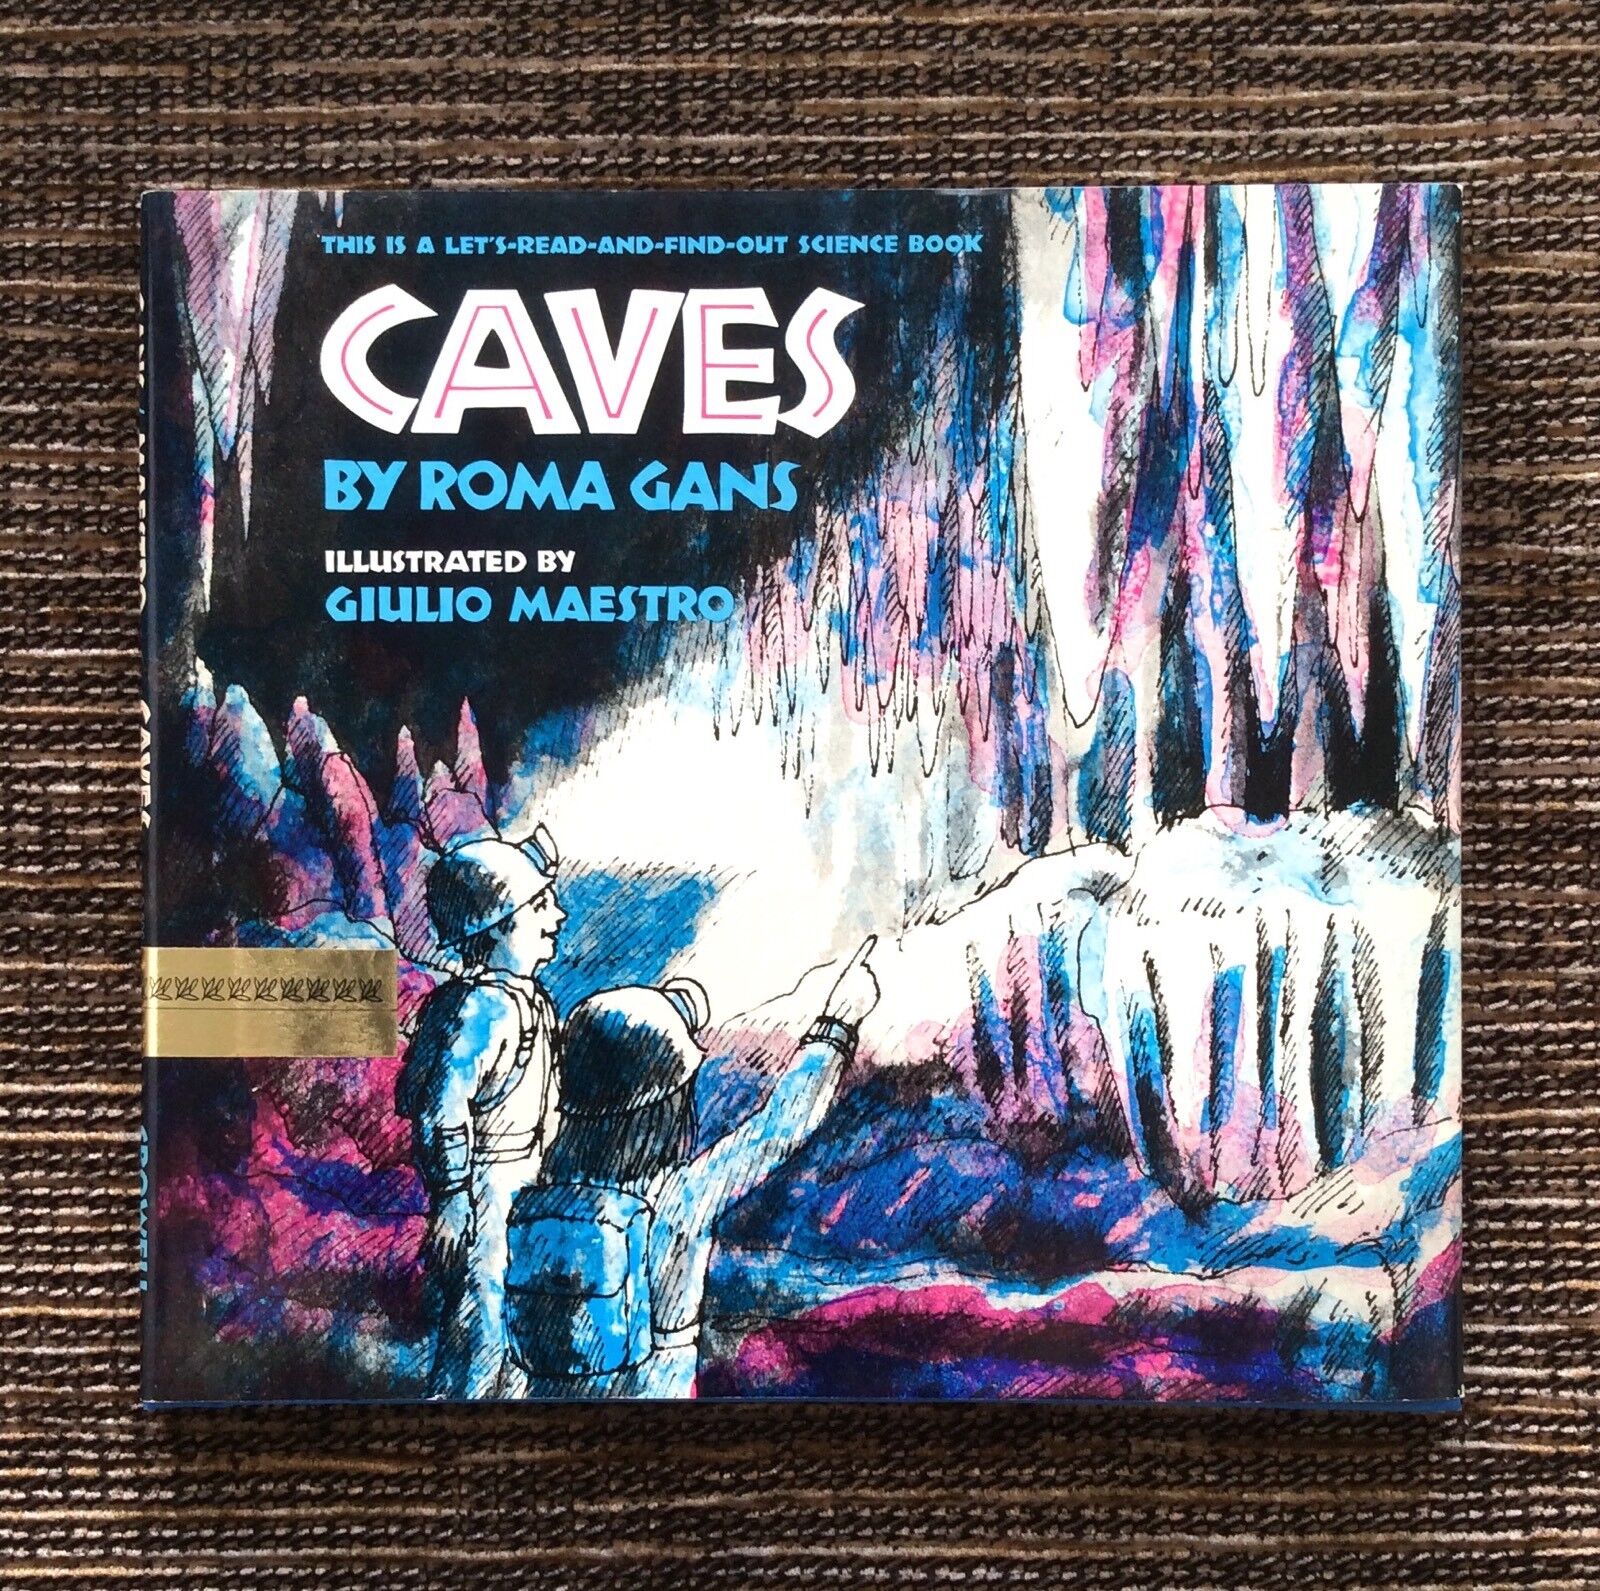 VERY RARE SIGNED 1st Edition VINTAGE 1976 Caves by Roma Gans, Hardcover